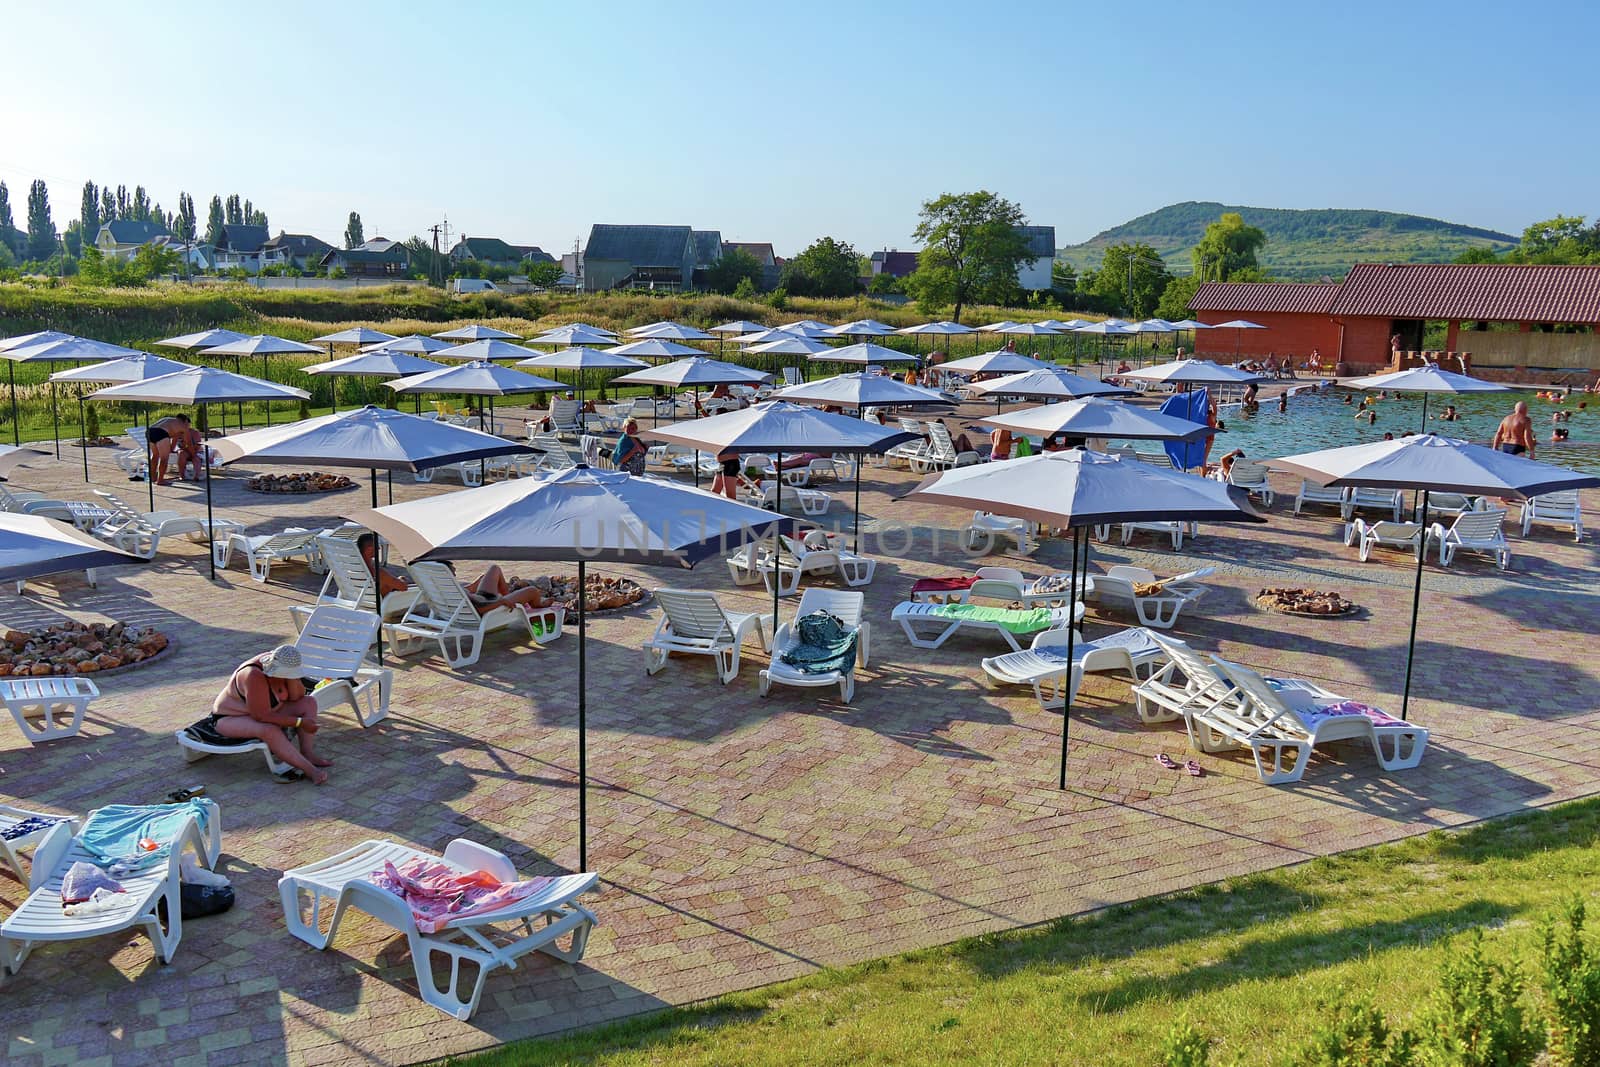 The beach is tiled with sun loungers and umbrellas. People can warm their bodies in the sun